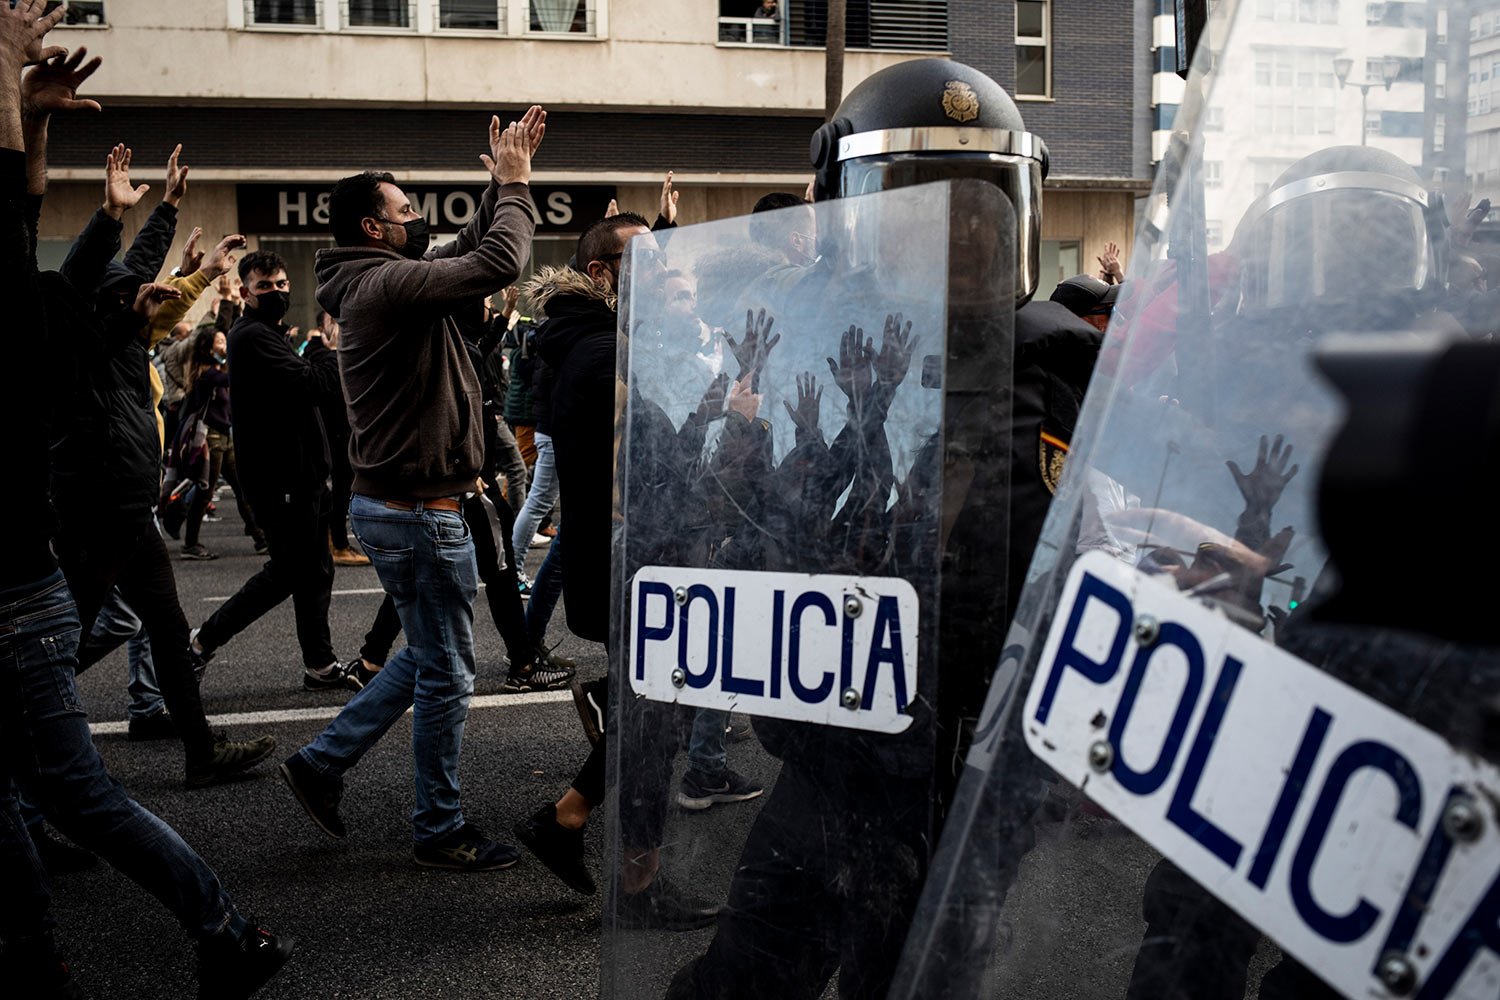  Protesters, left, march during a strike organized by metal workers in Cadiz, southern Spain, Nov. 23, 2021. (AP Photo/Javier Fergo) 